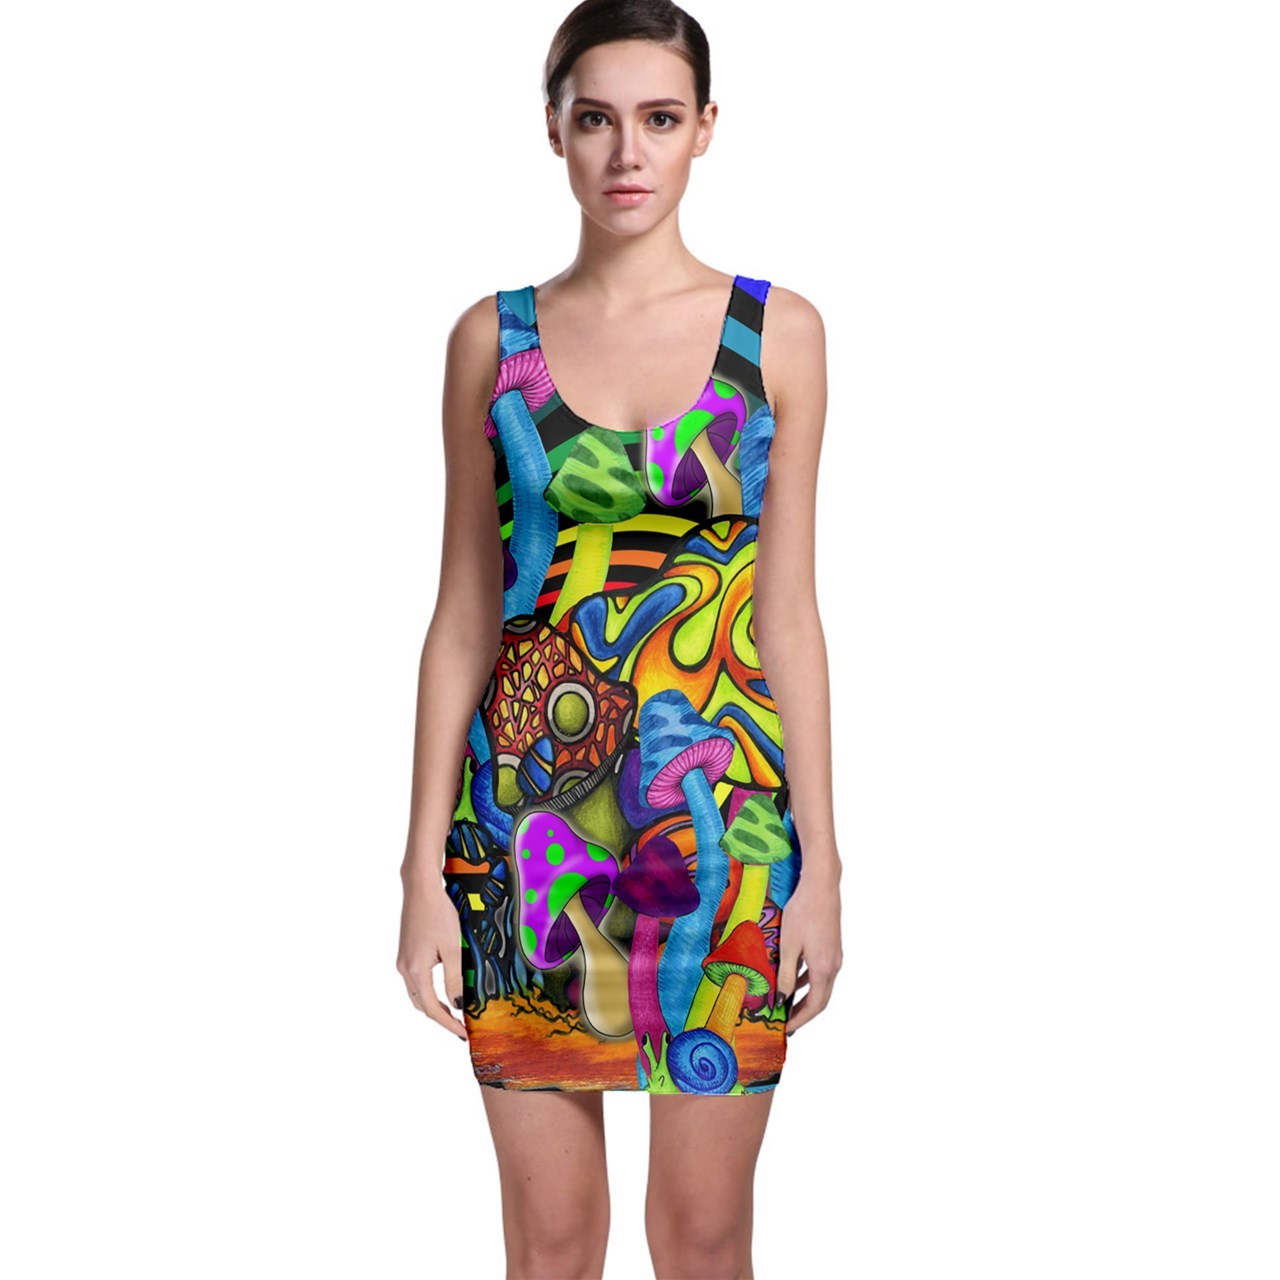 Primary image for Streetwear Sexy Bodycon Dancing Dress magic mushroom trippy psychedelic hippie 